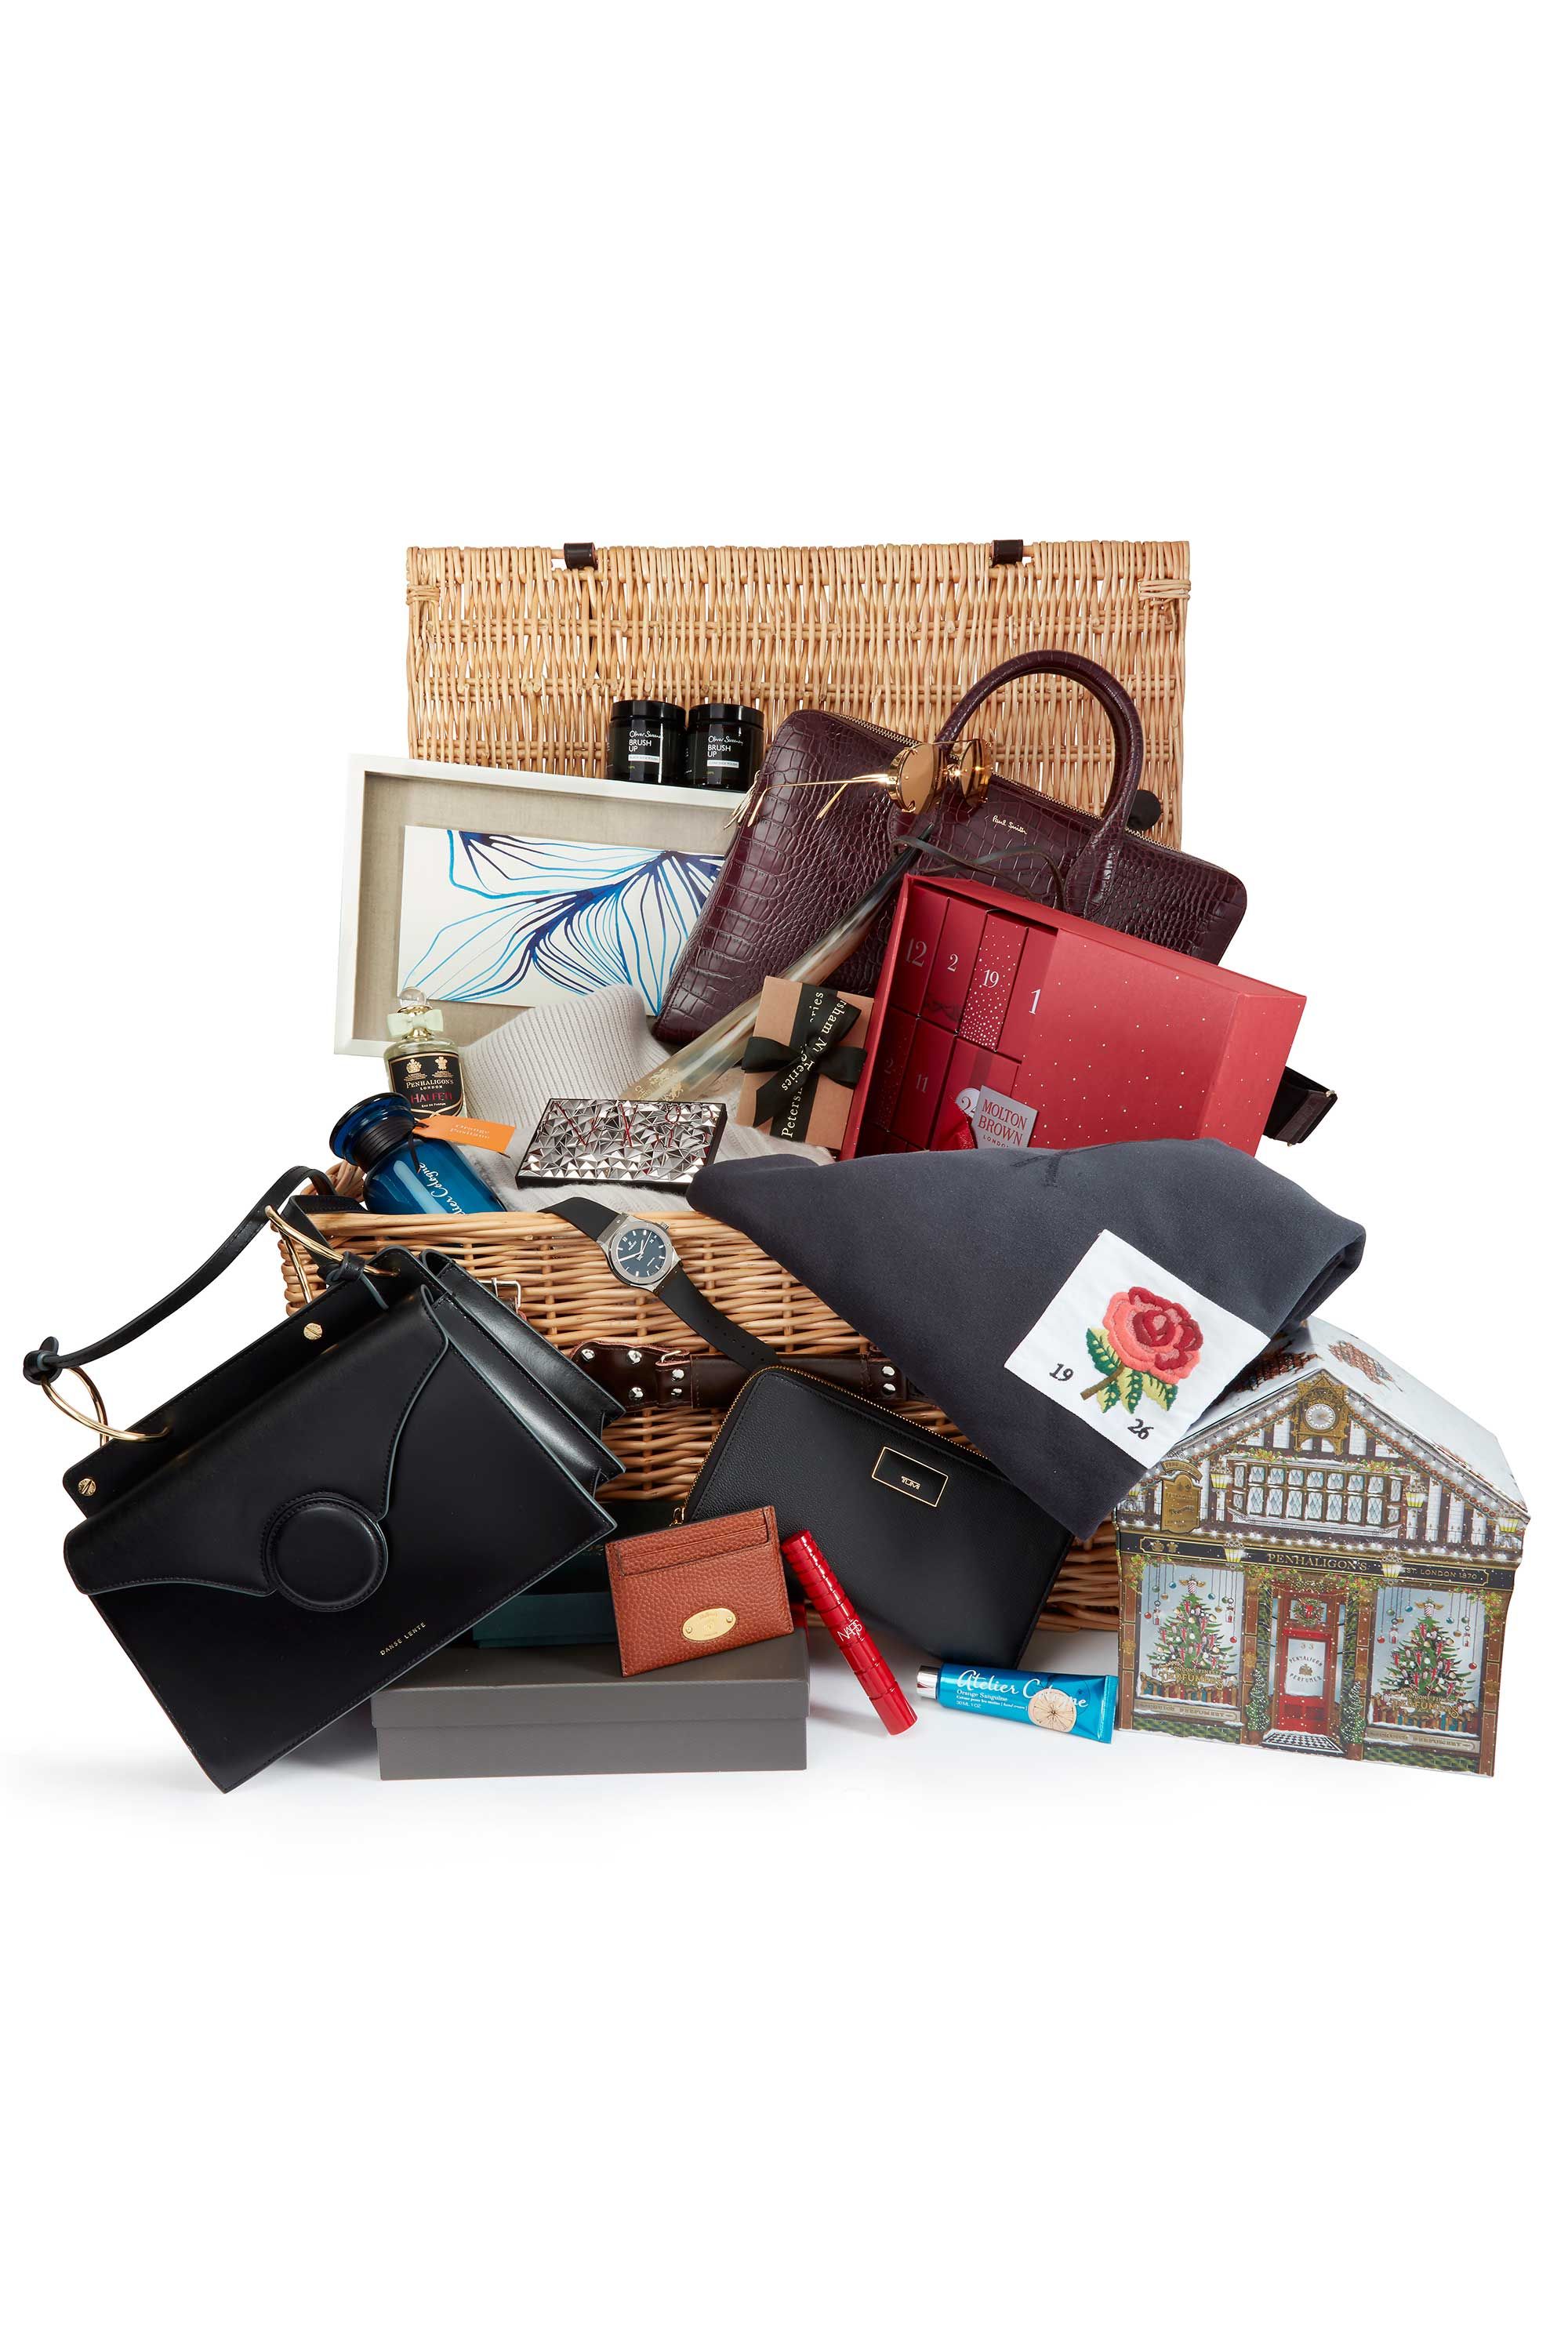 5 luxury gift ideas for the holiday